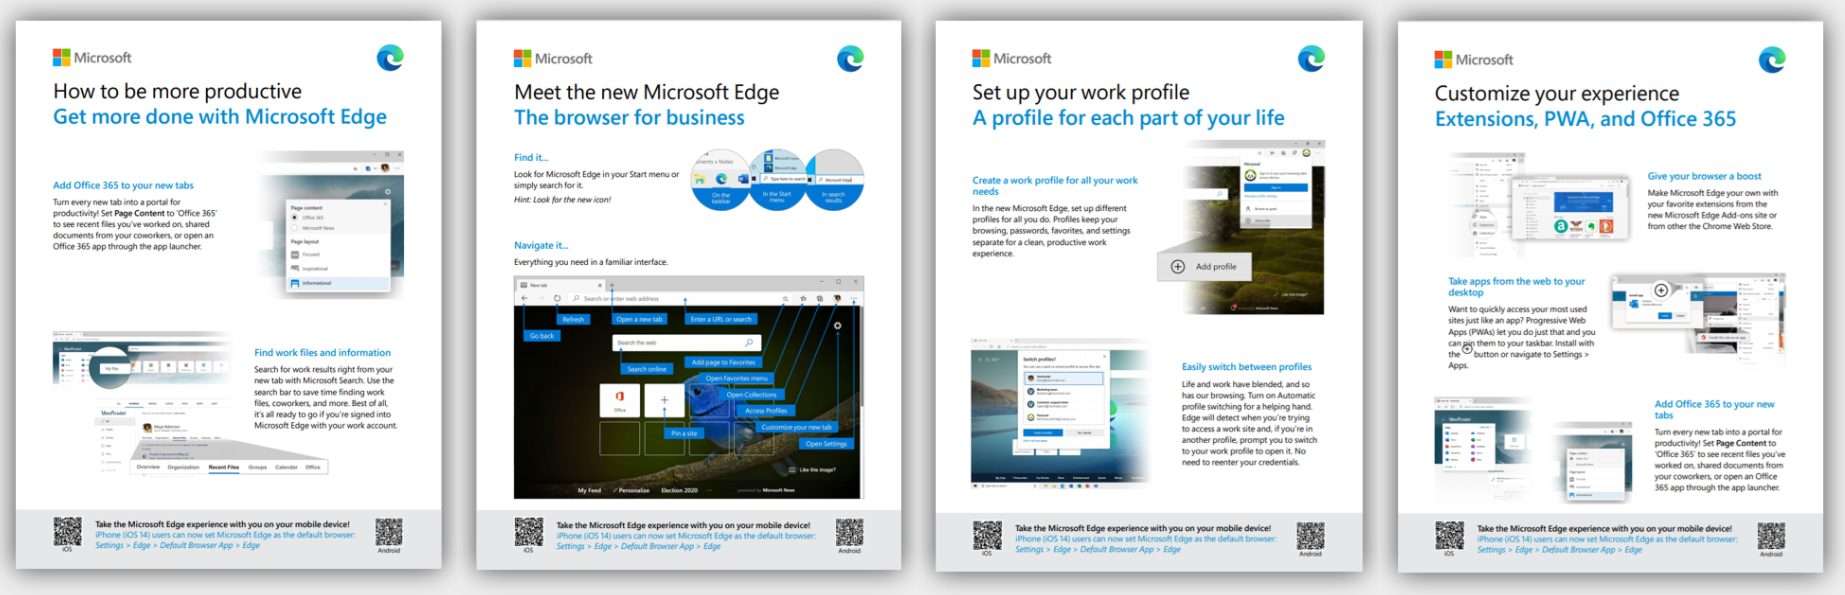 One-pager for learning about Microsoft Edge.